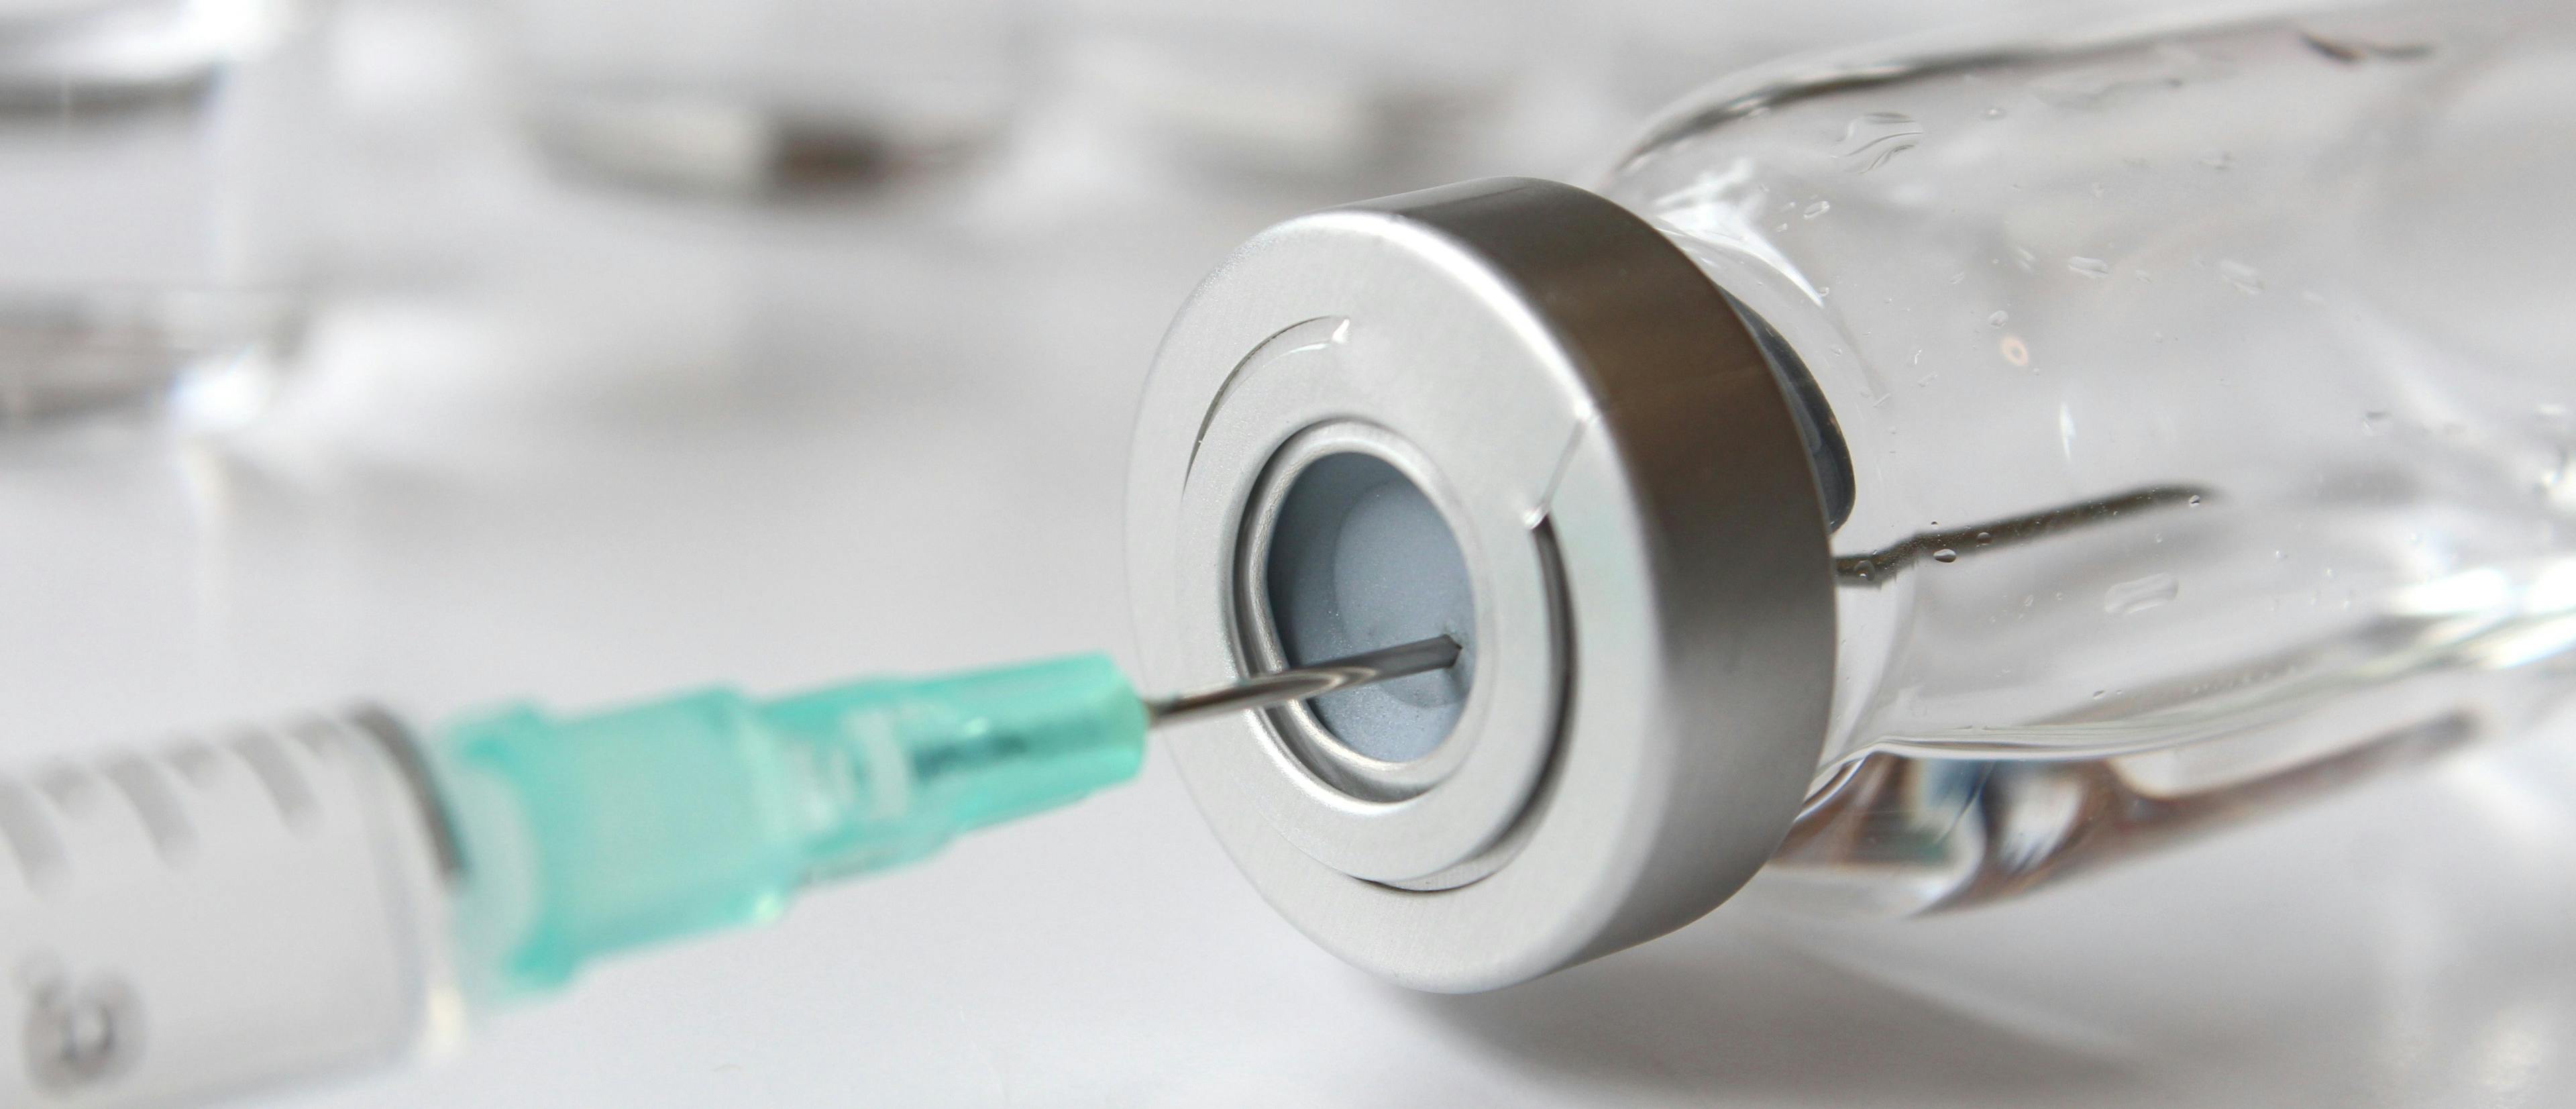 Routine Immunizations Linked to Decline in Rotavirus Hospitalizations, Health Care Costs